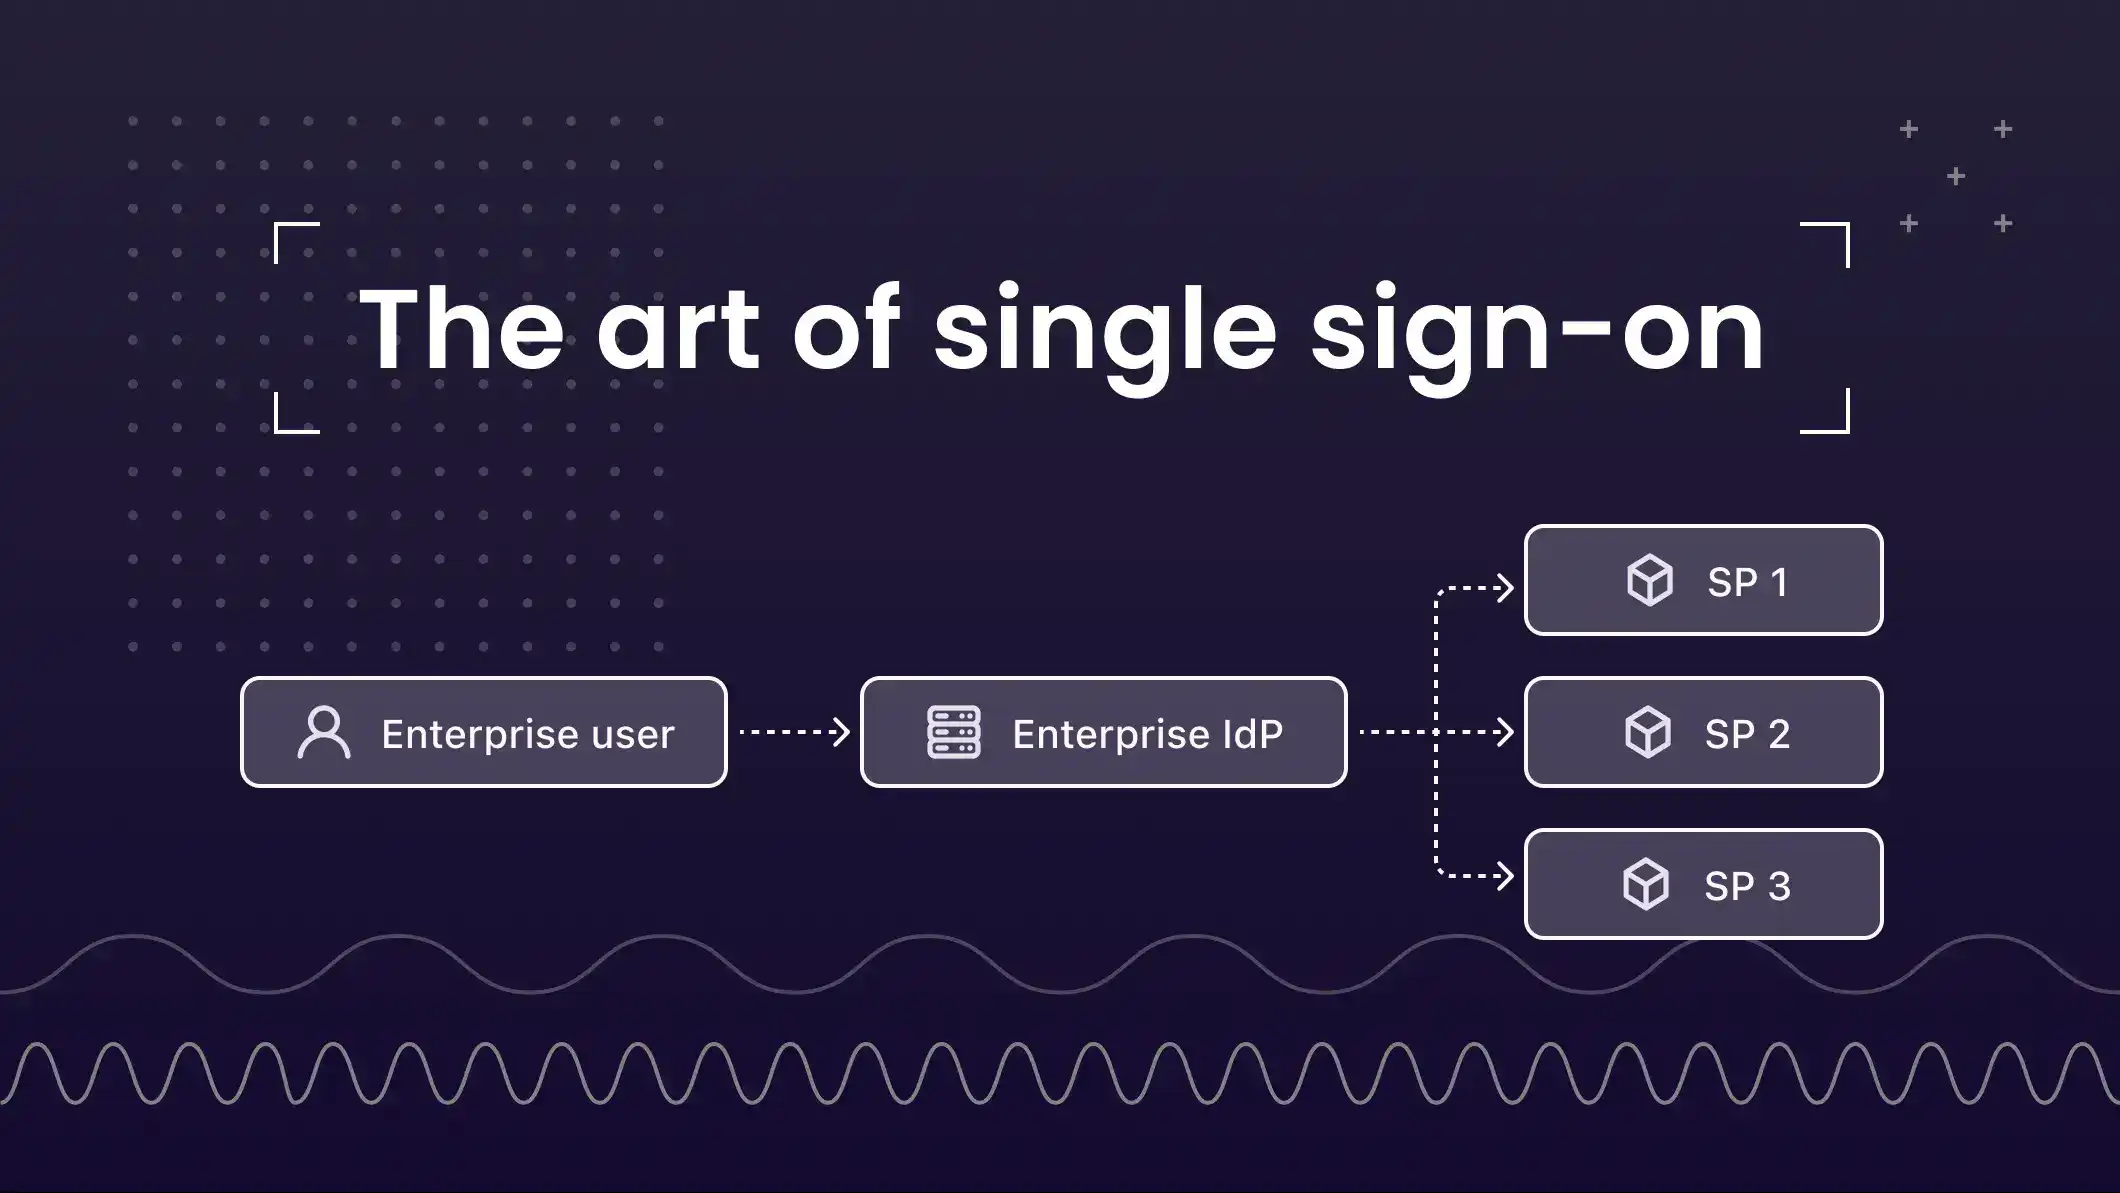 The art of single sign-on